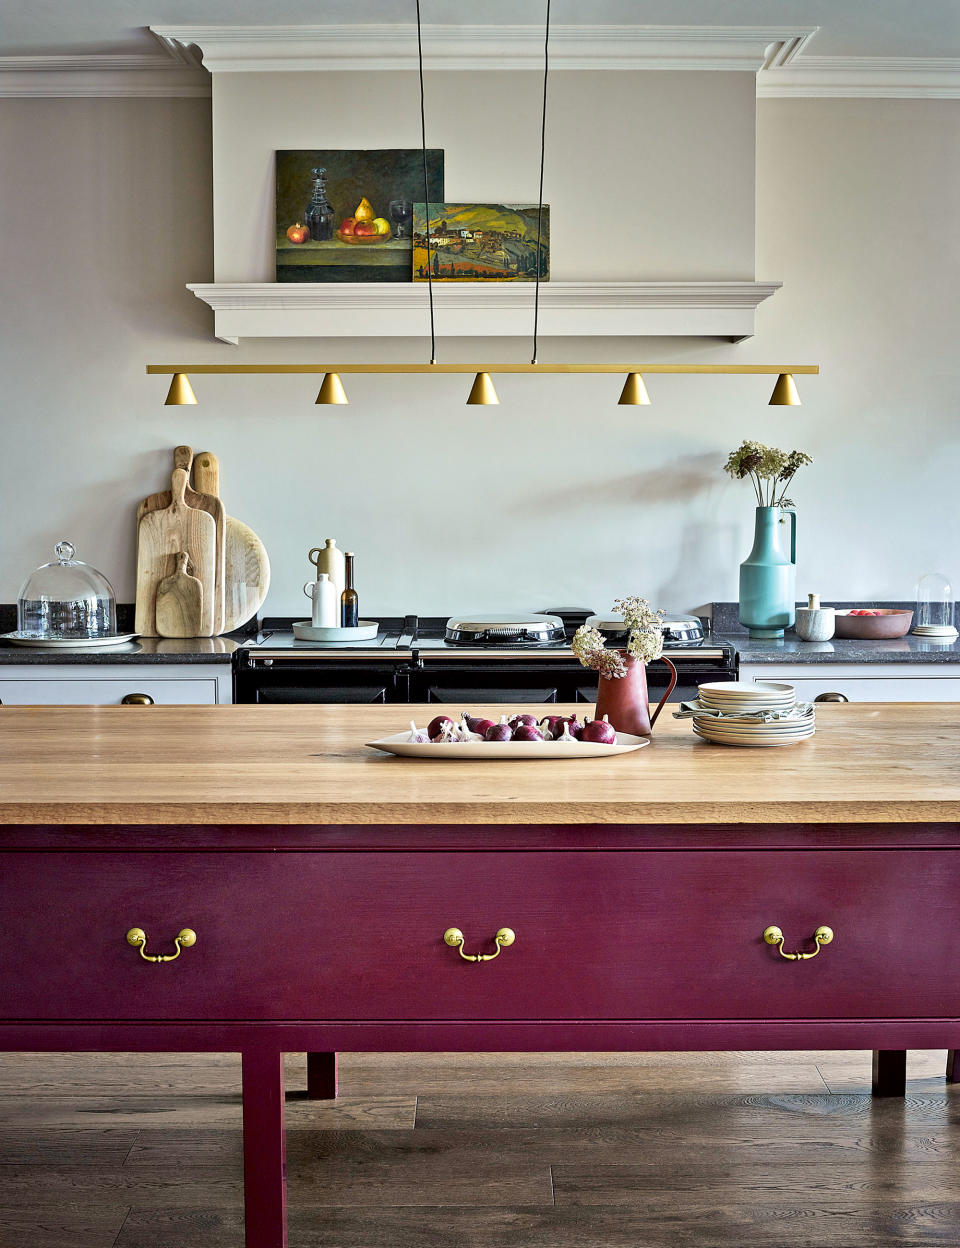 7. Liven-up a neutral kitchen with a purple island